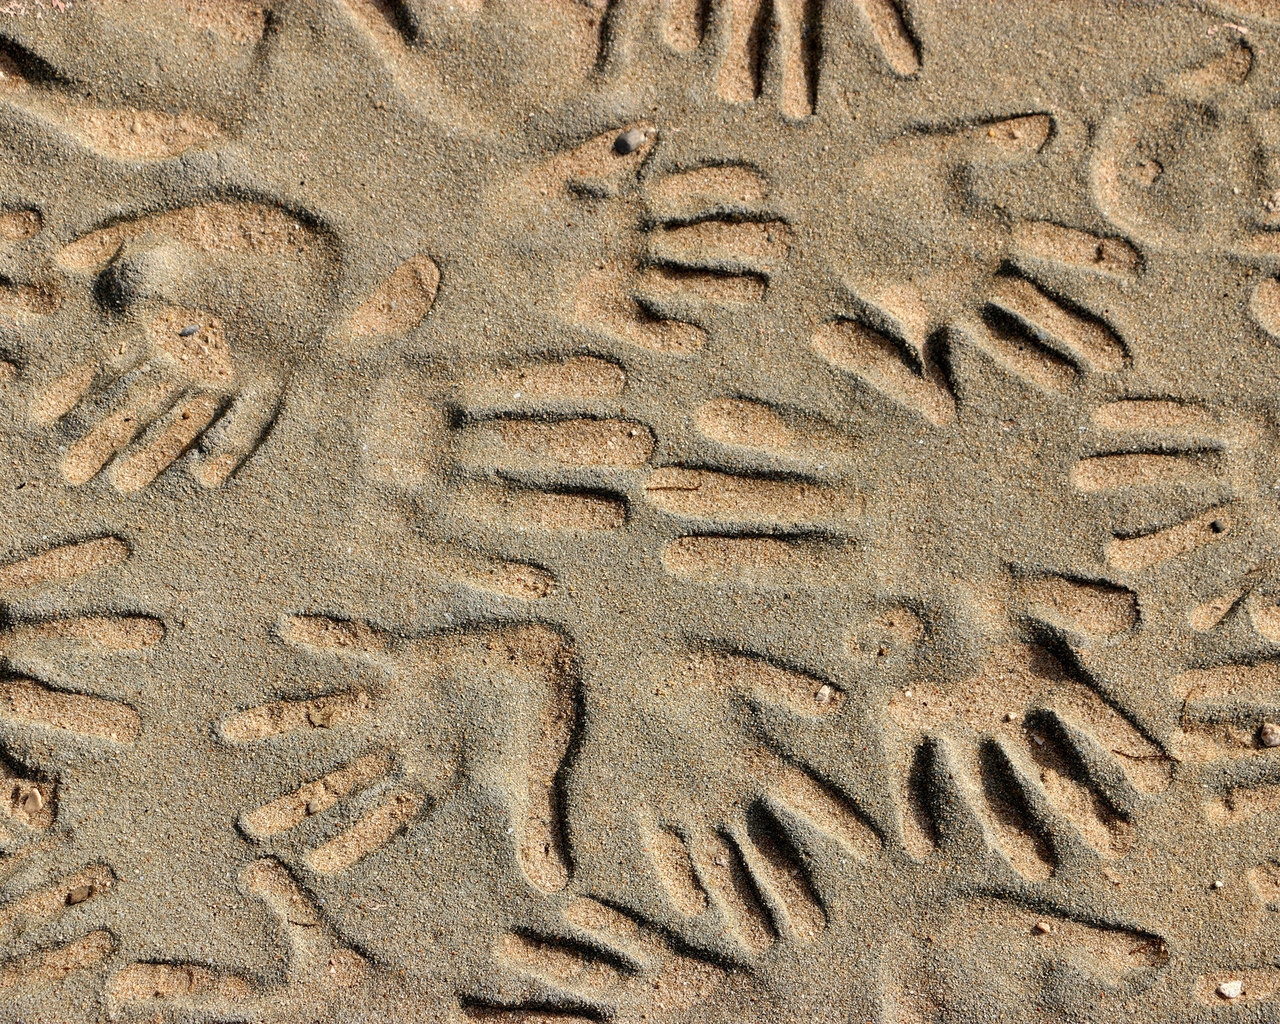 Handprints in the Sand for 1280 x 1024 resolution